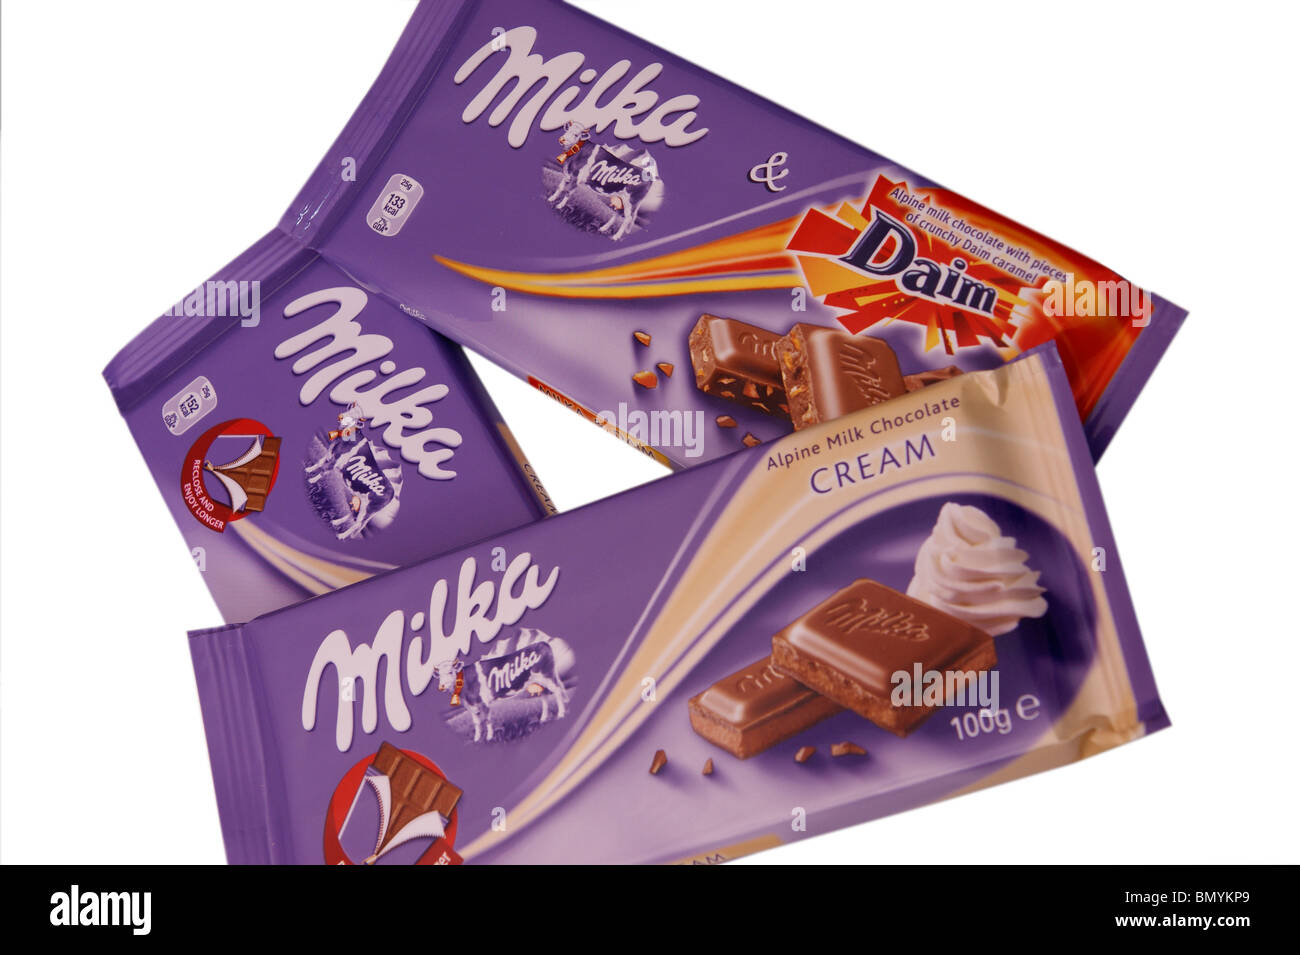 Milka chocolate bars owned by Kraft (Cadbury bars to be replaced by kraft products) Stock Photo